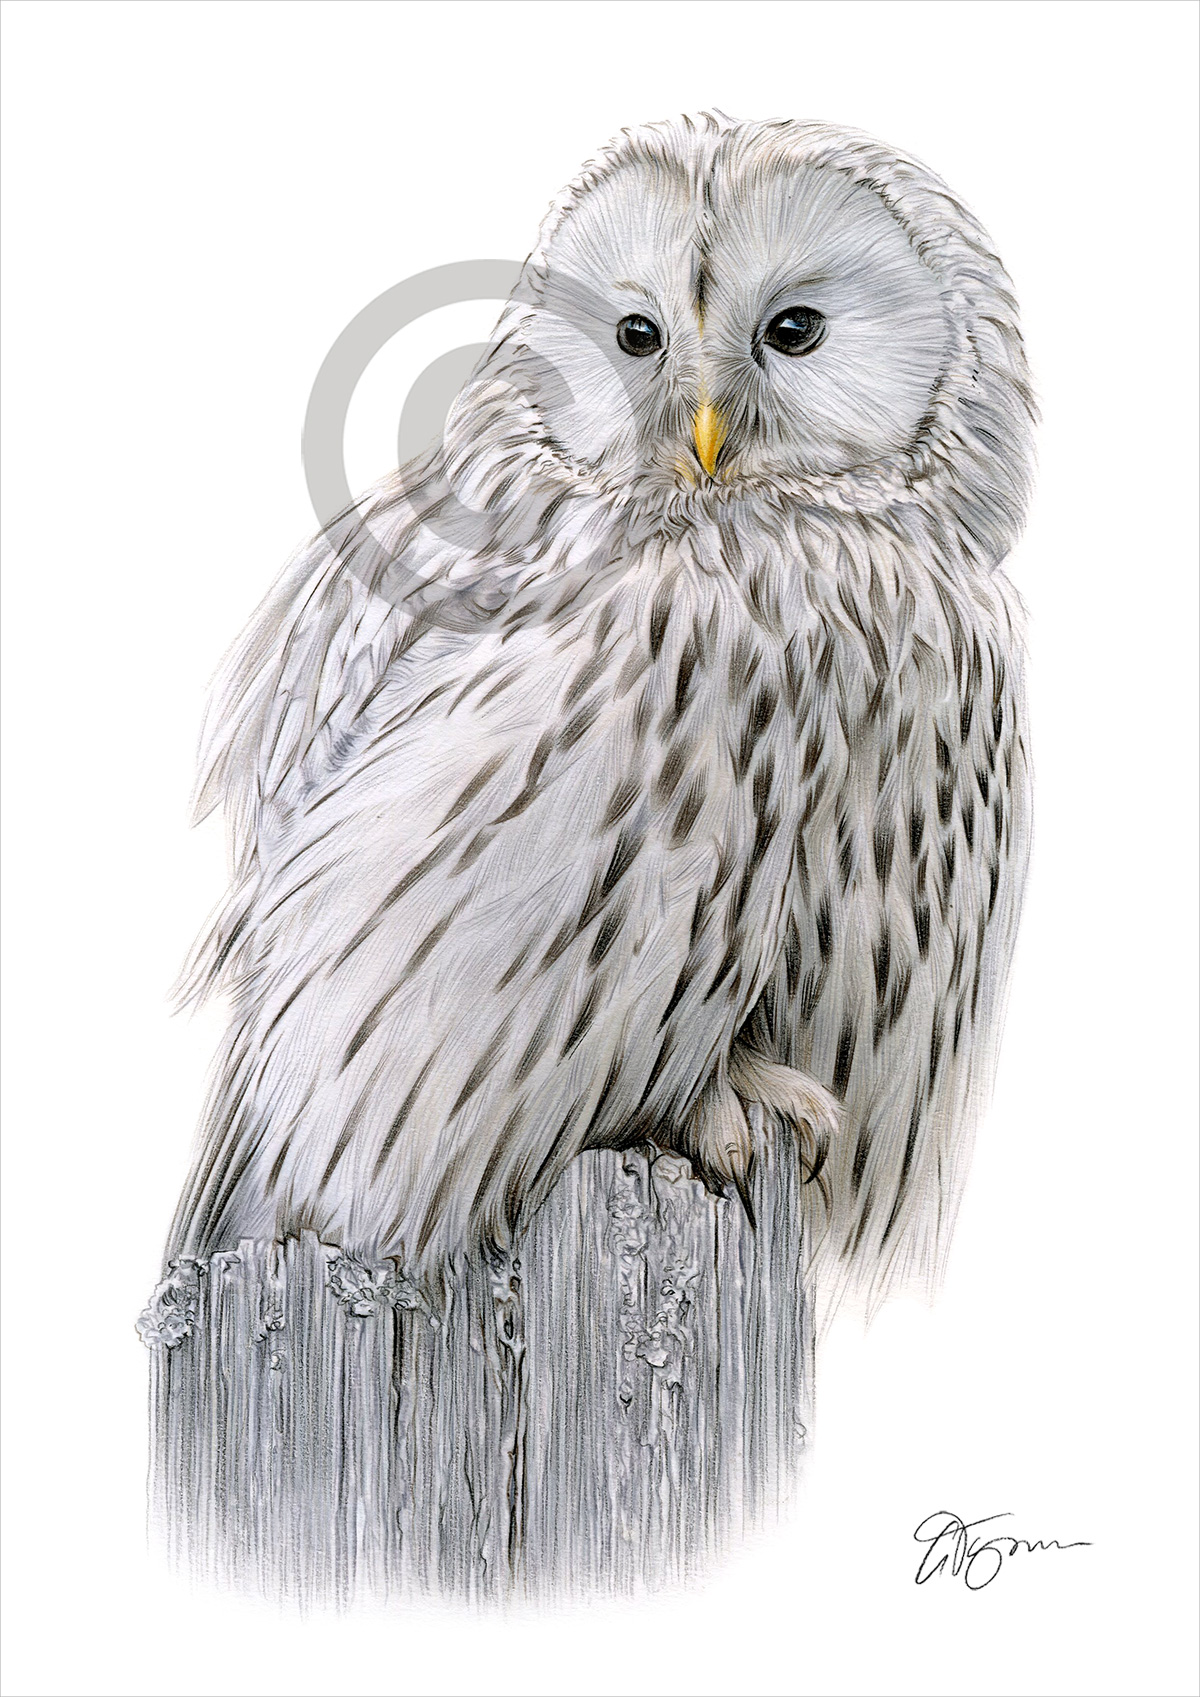 Colour pencil drawing of a ural owl by artist Gary Tymon